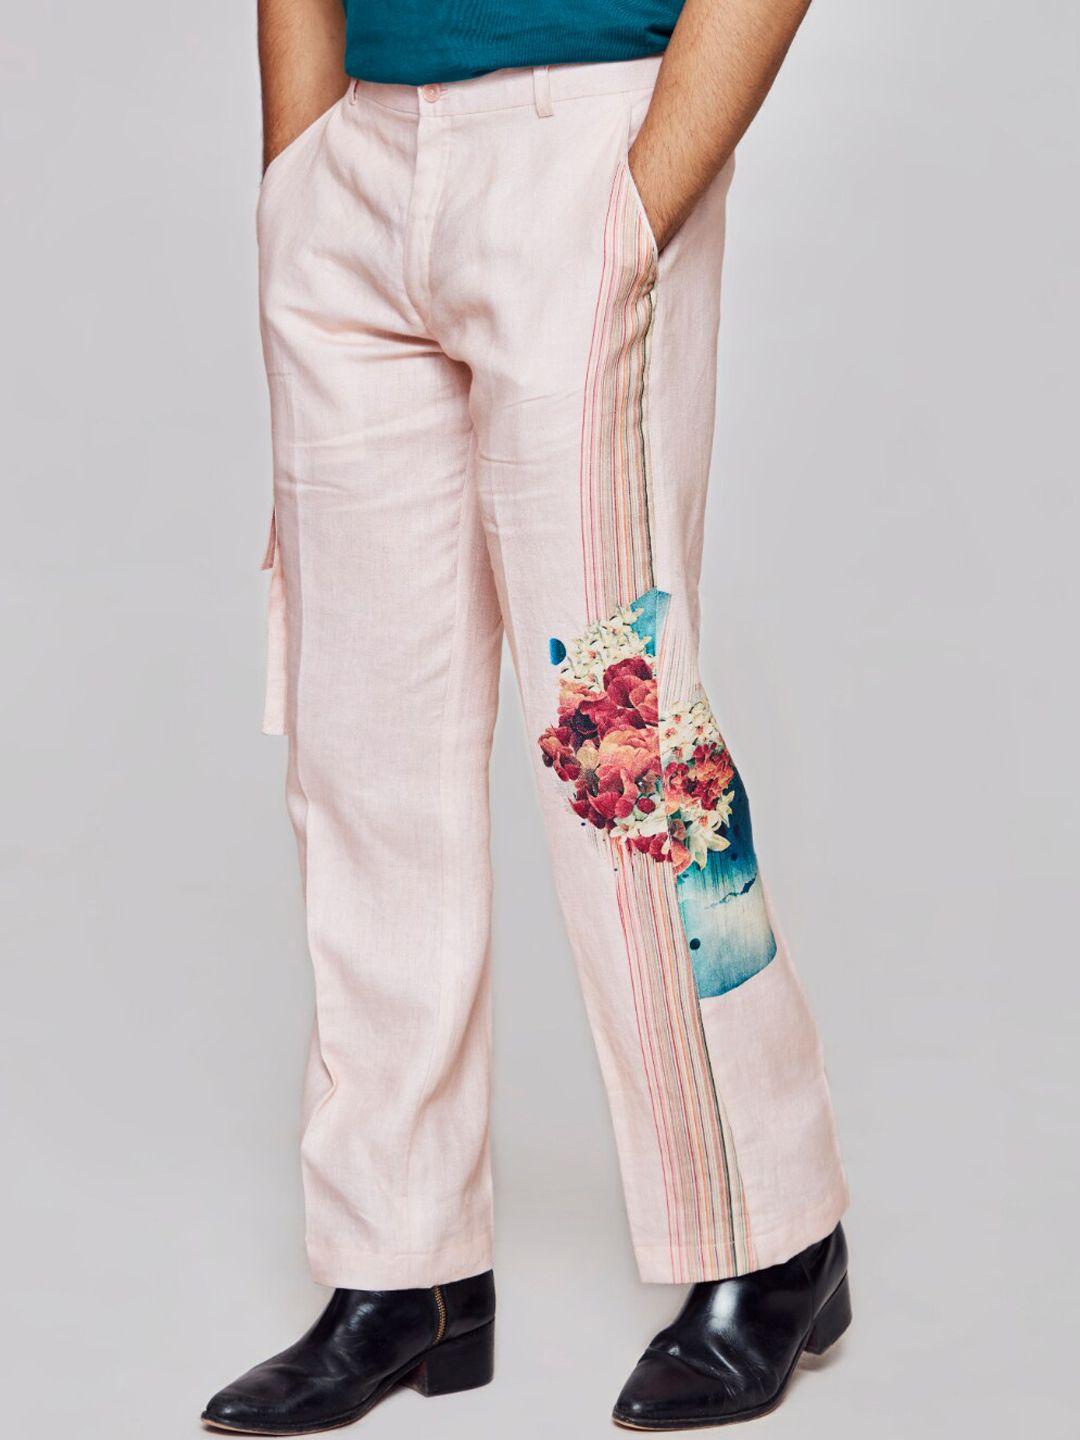 addy's for men floral printed mid rise plain linen trousers